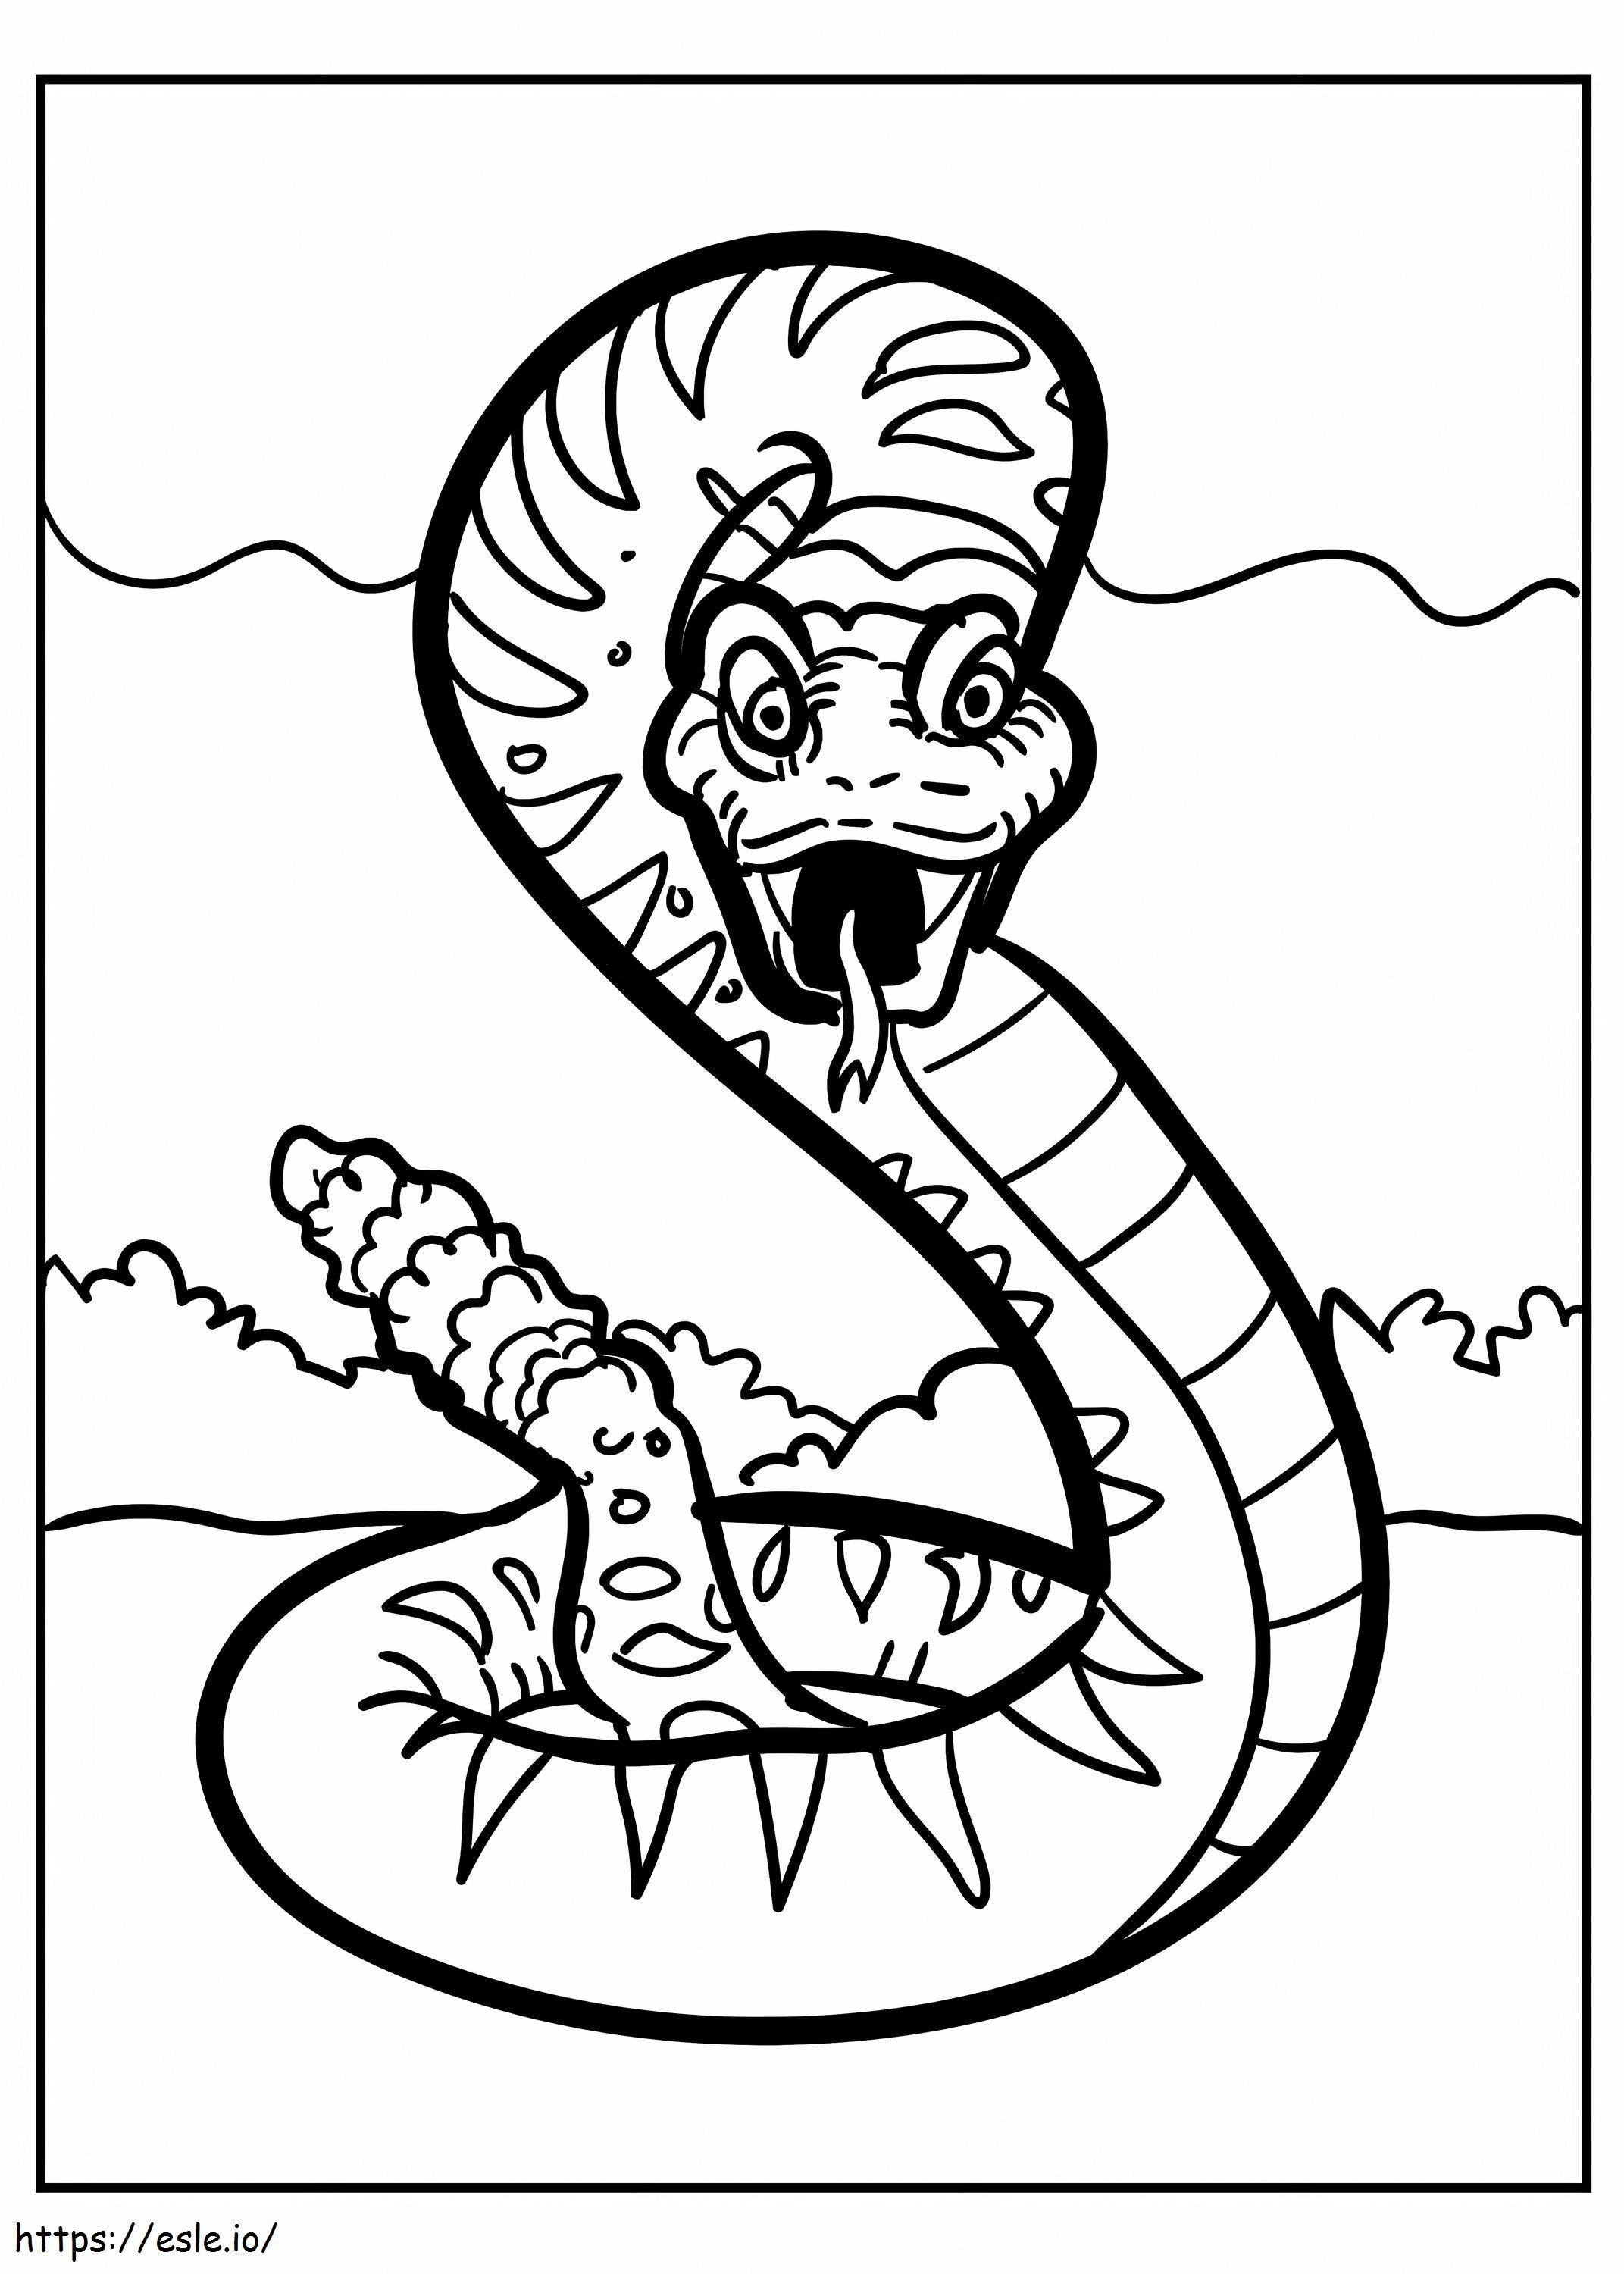 Scary Rattlesnake coloring page